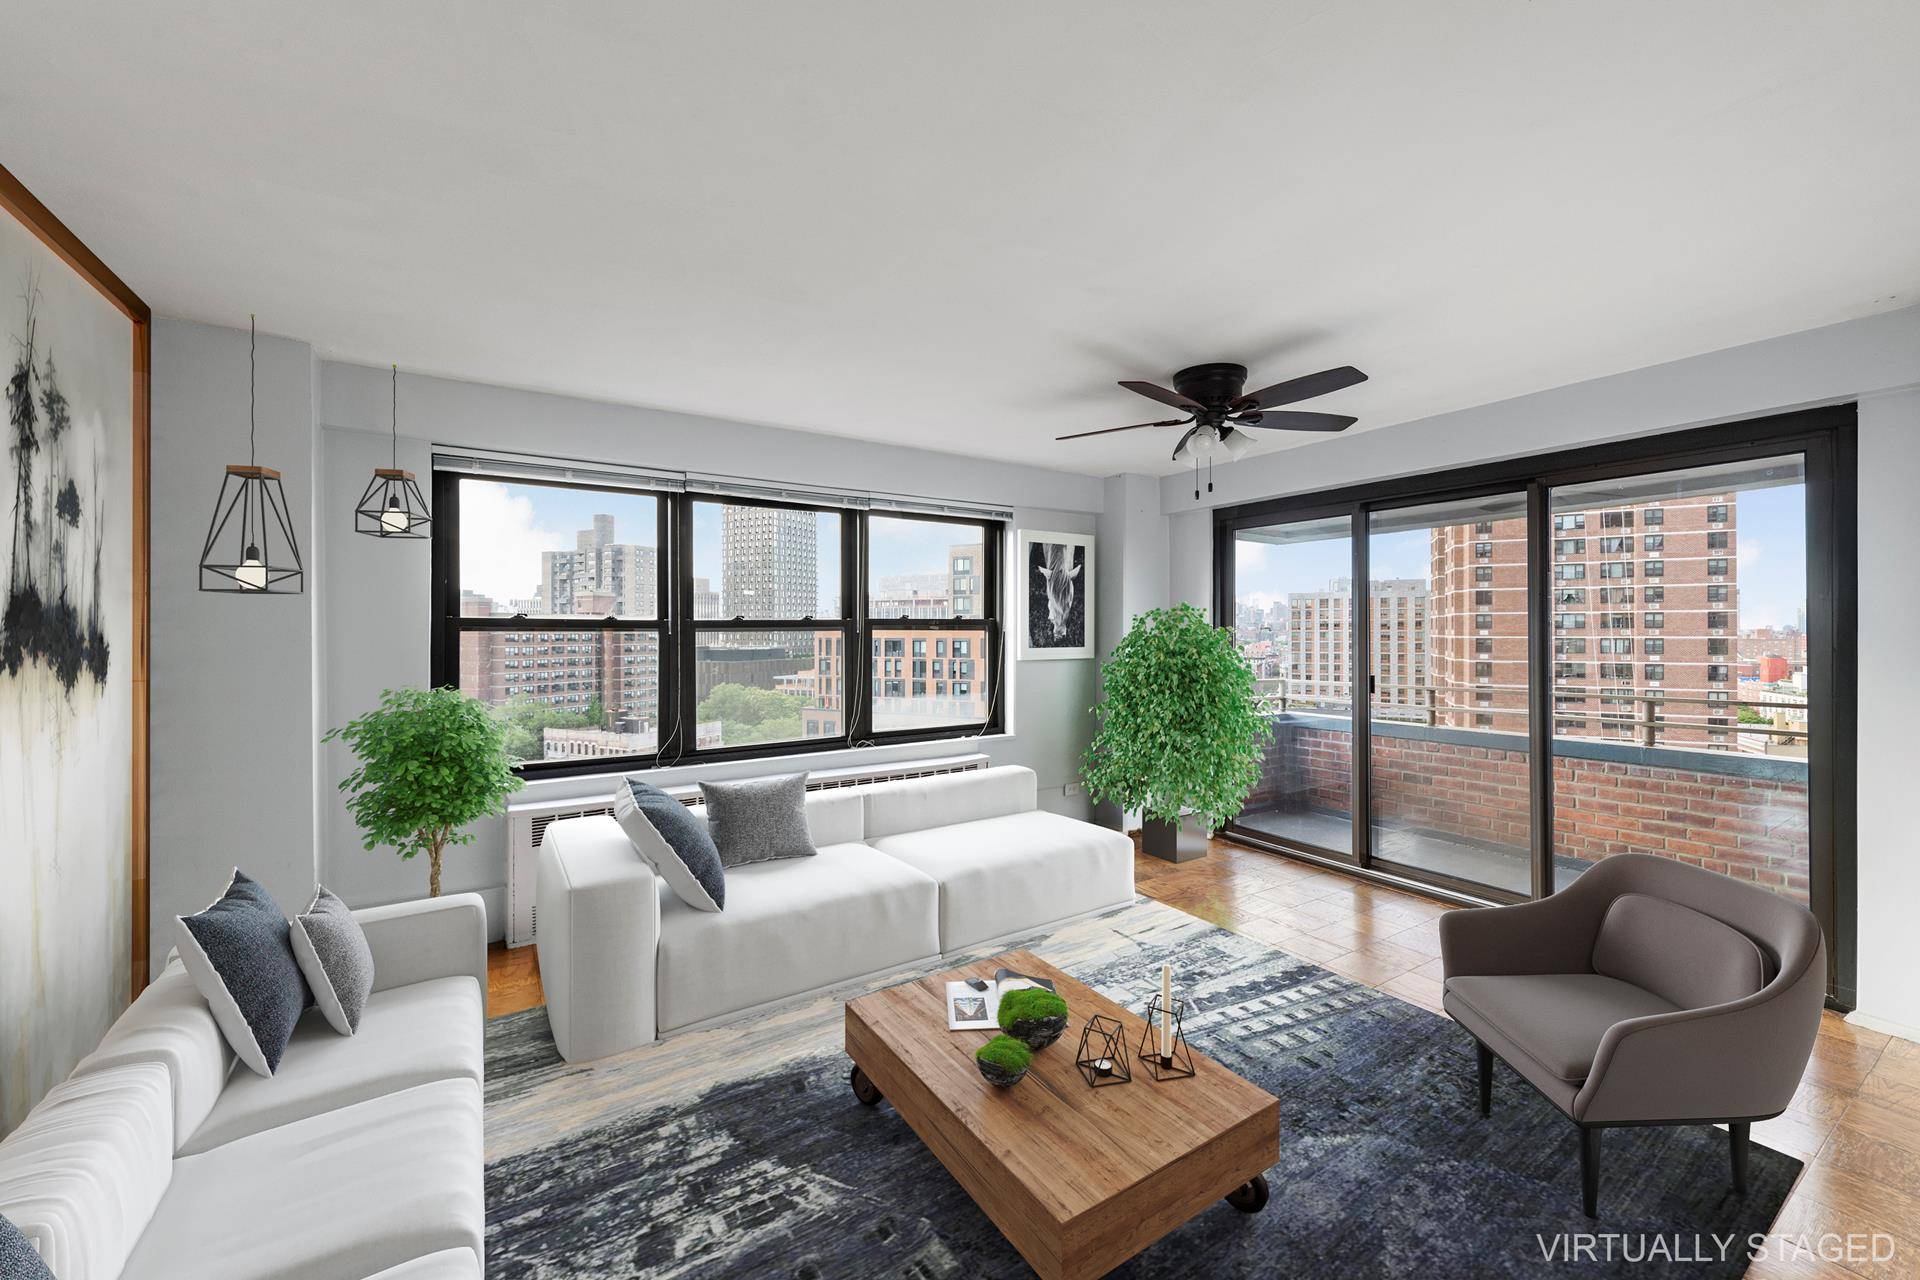 Imagine sitting at your private balcony on a breezy summer evening, watching a beautiful sunset as the skyscrapers' lights, from midtown to downtown, start competing with the stars in illuminating ...